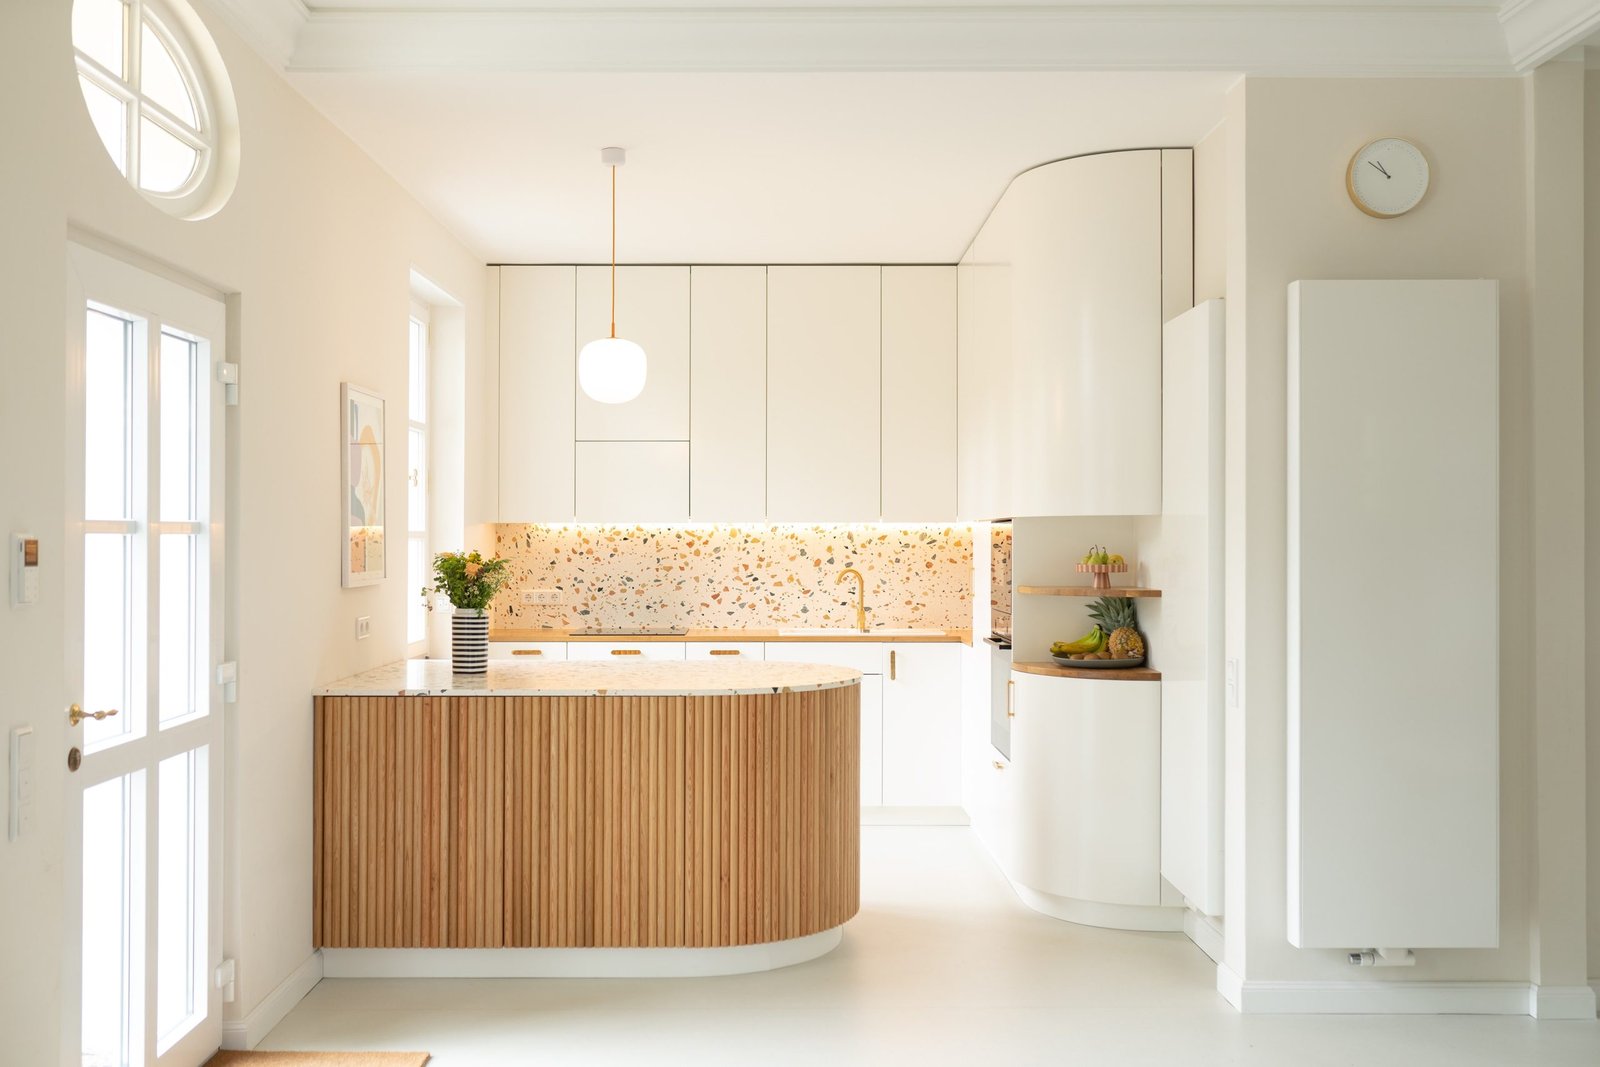 How to Create a Kitchen That is Both Functional And Stylish